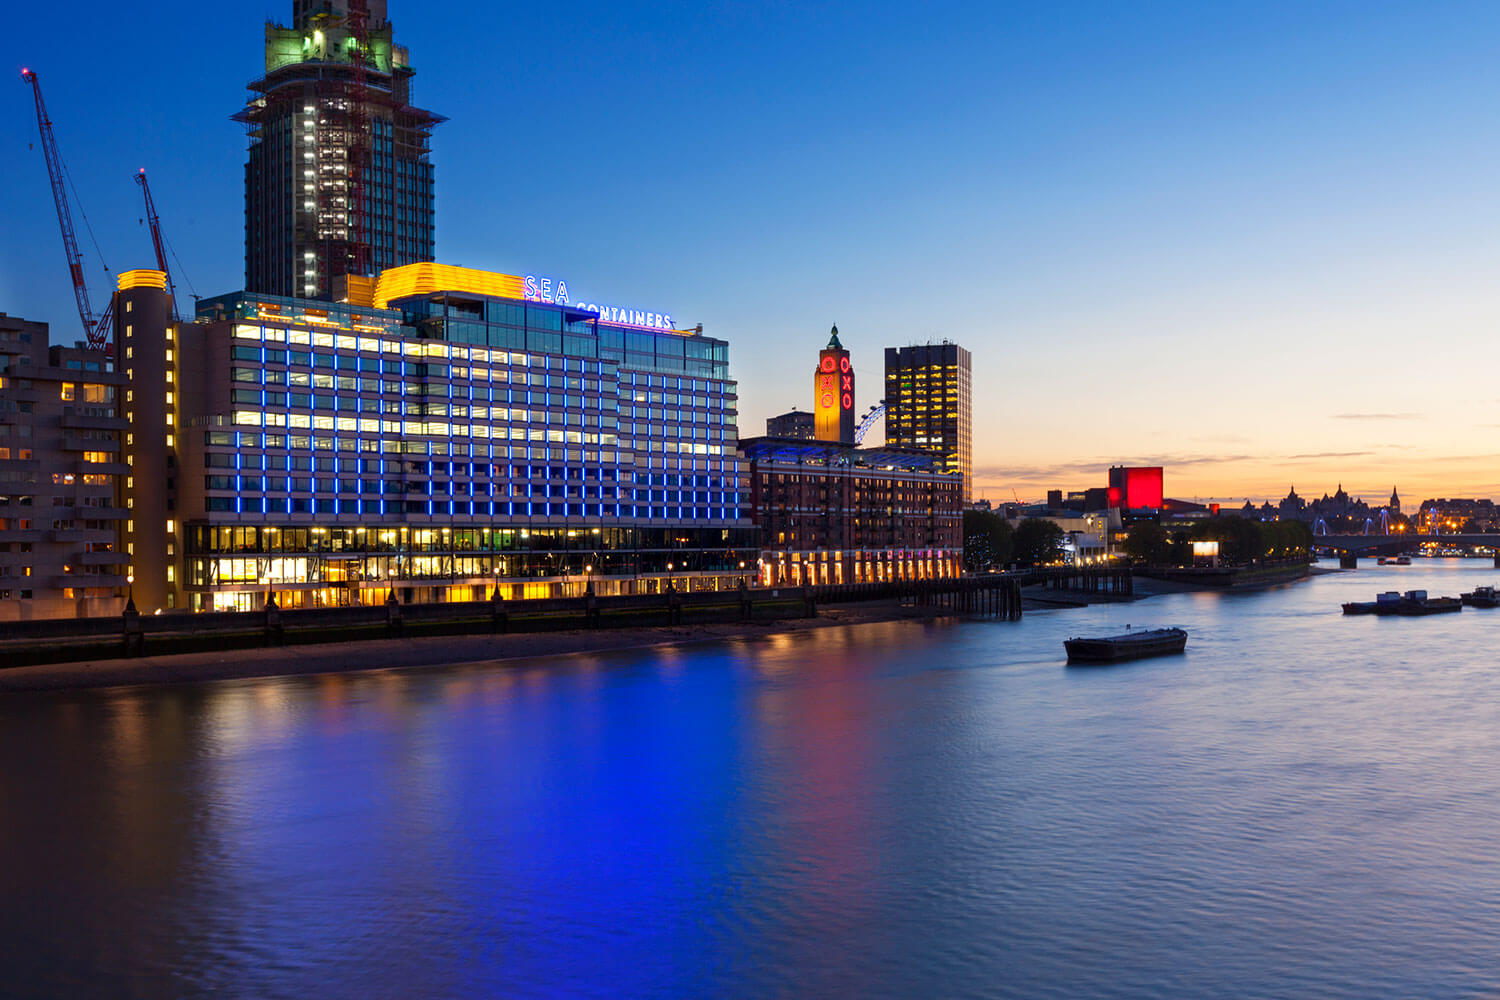 sea-containers-house-south-bank-london-3-mjlighting